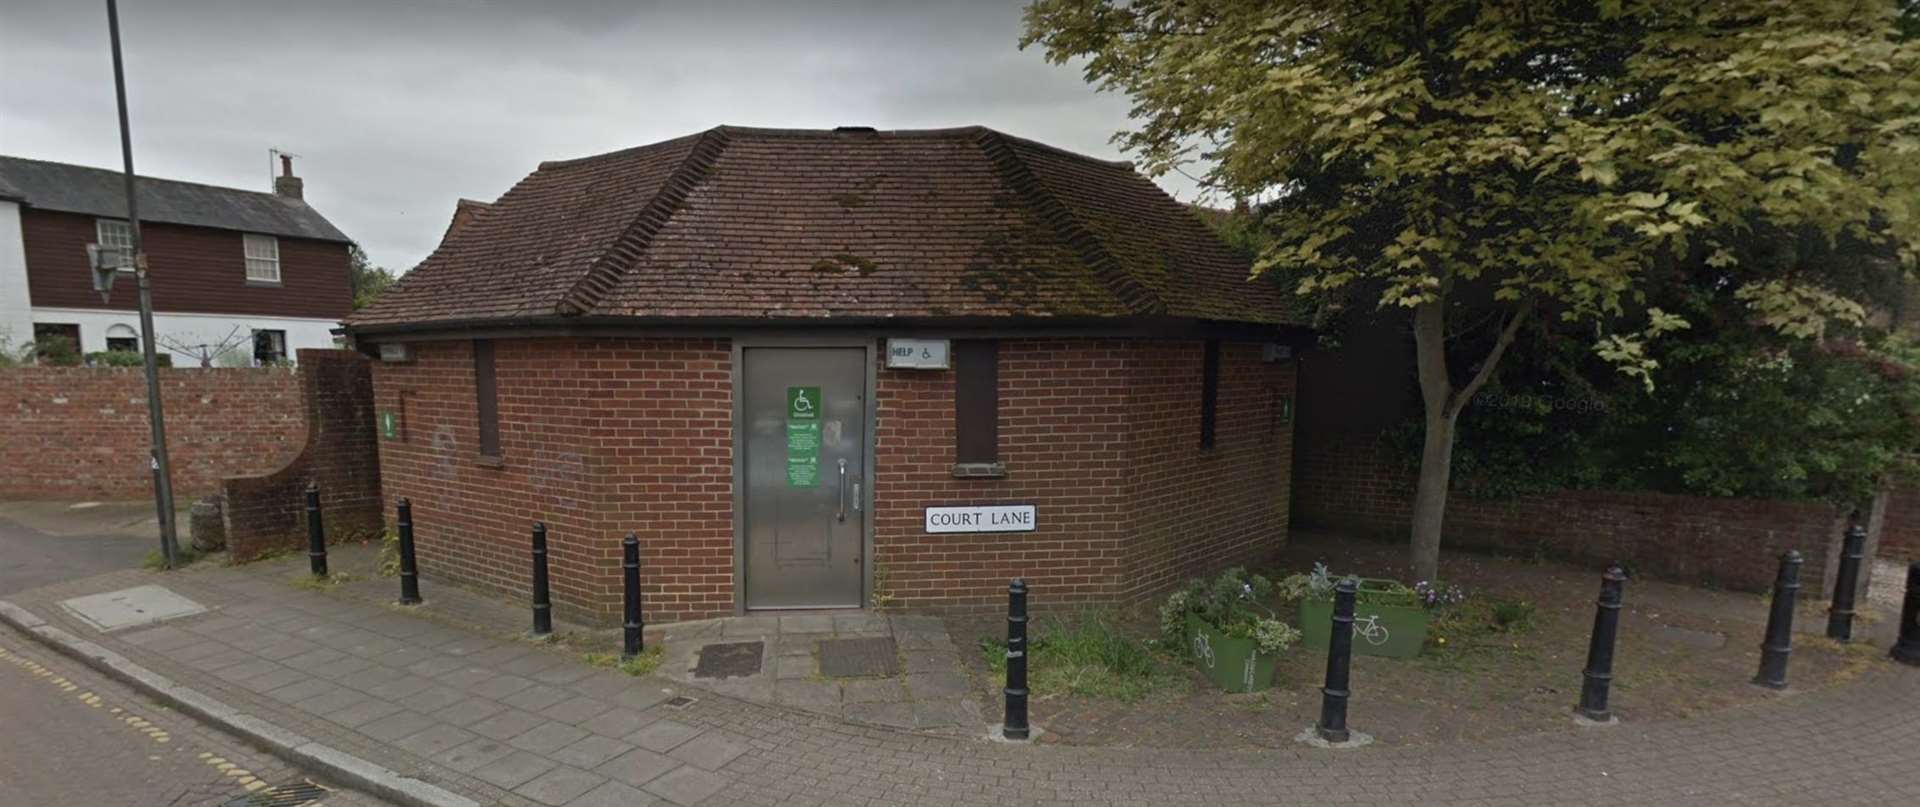 The loos in Court Lane, Hadlow have closed for good. Picture: Google Street View